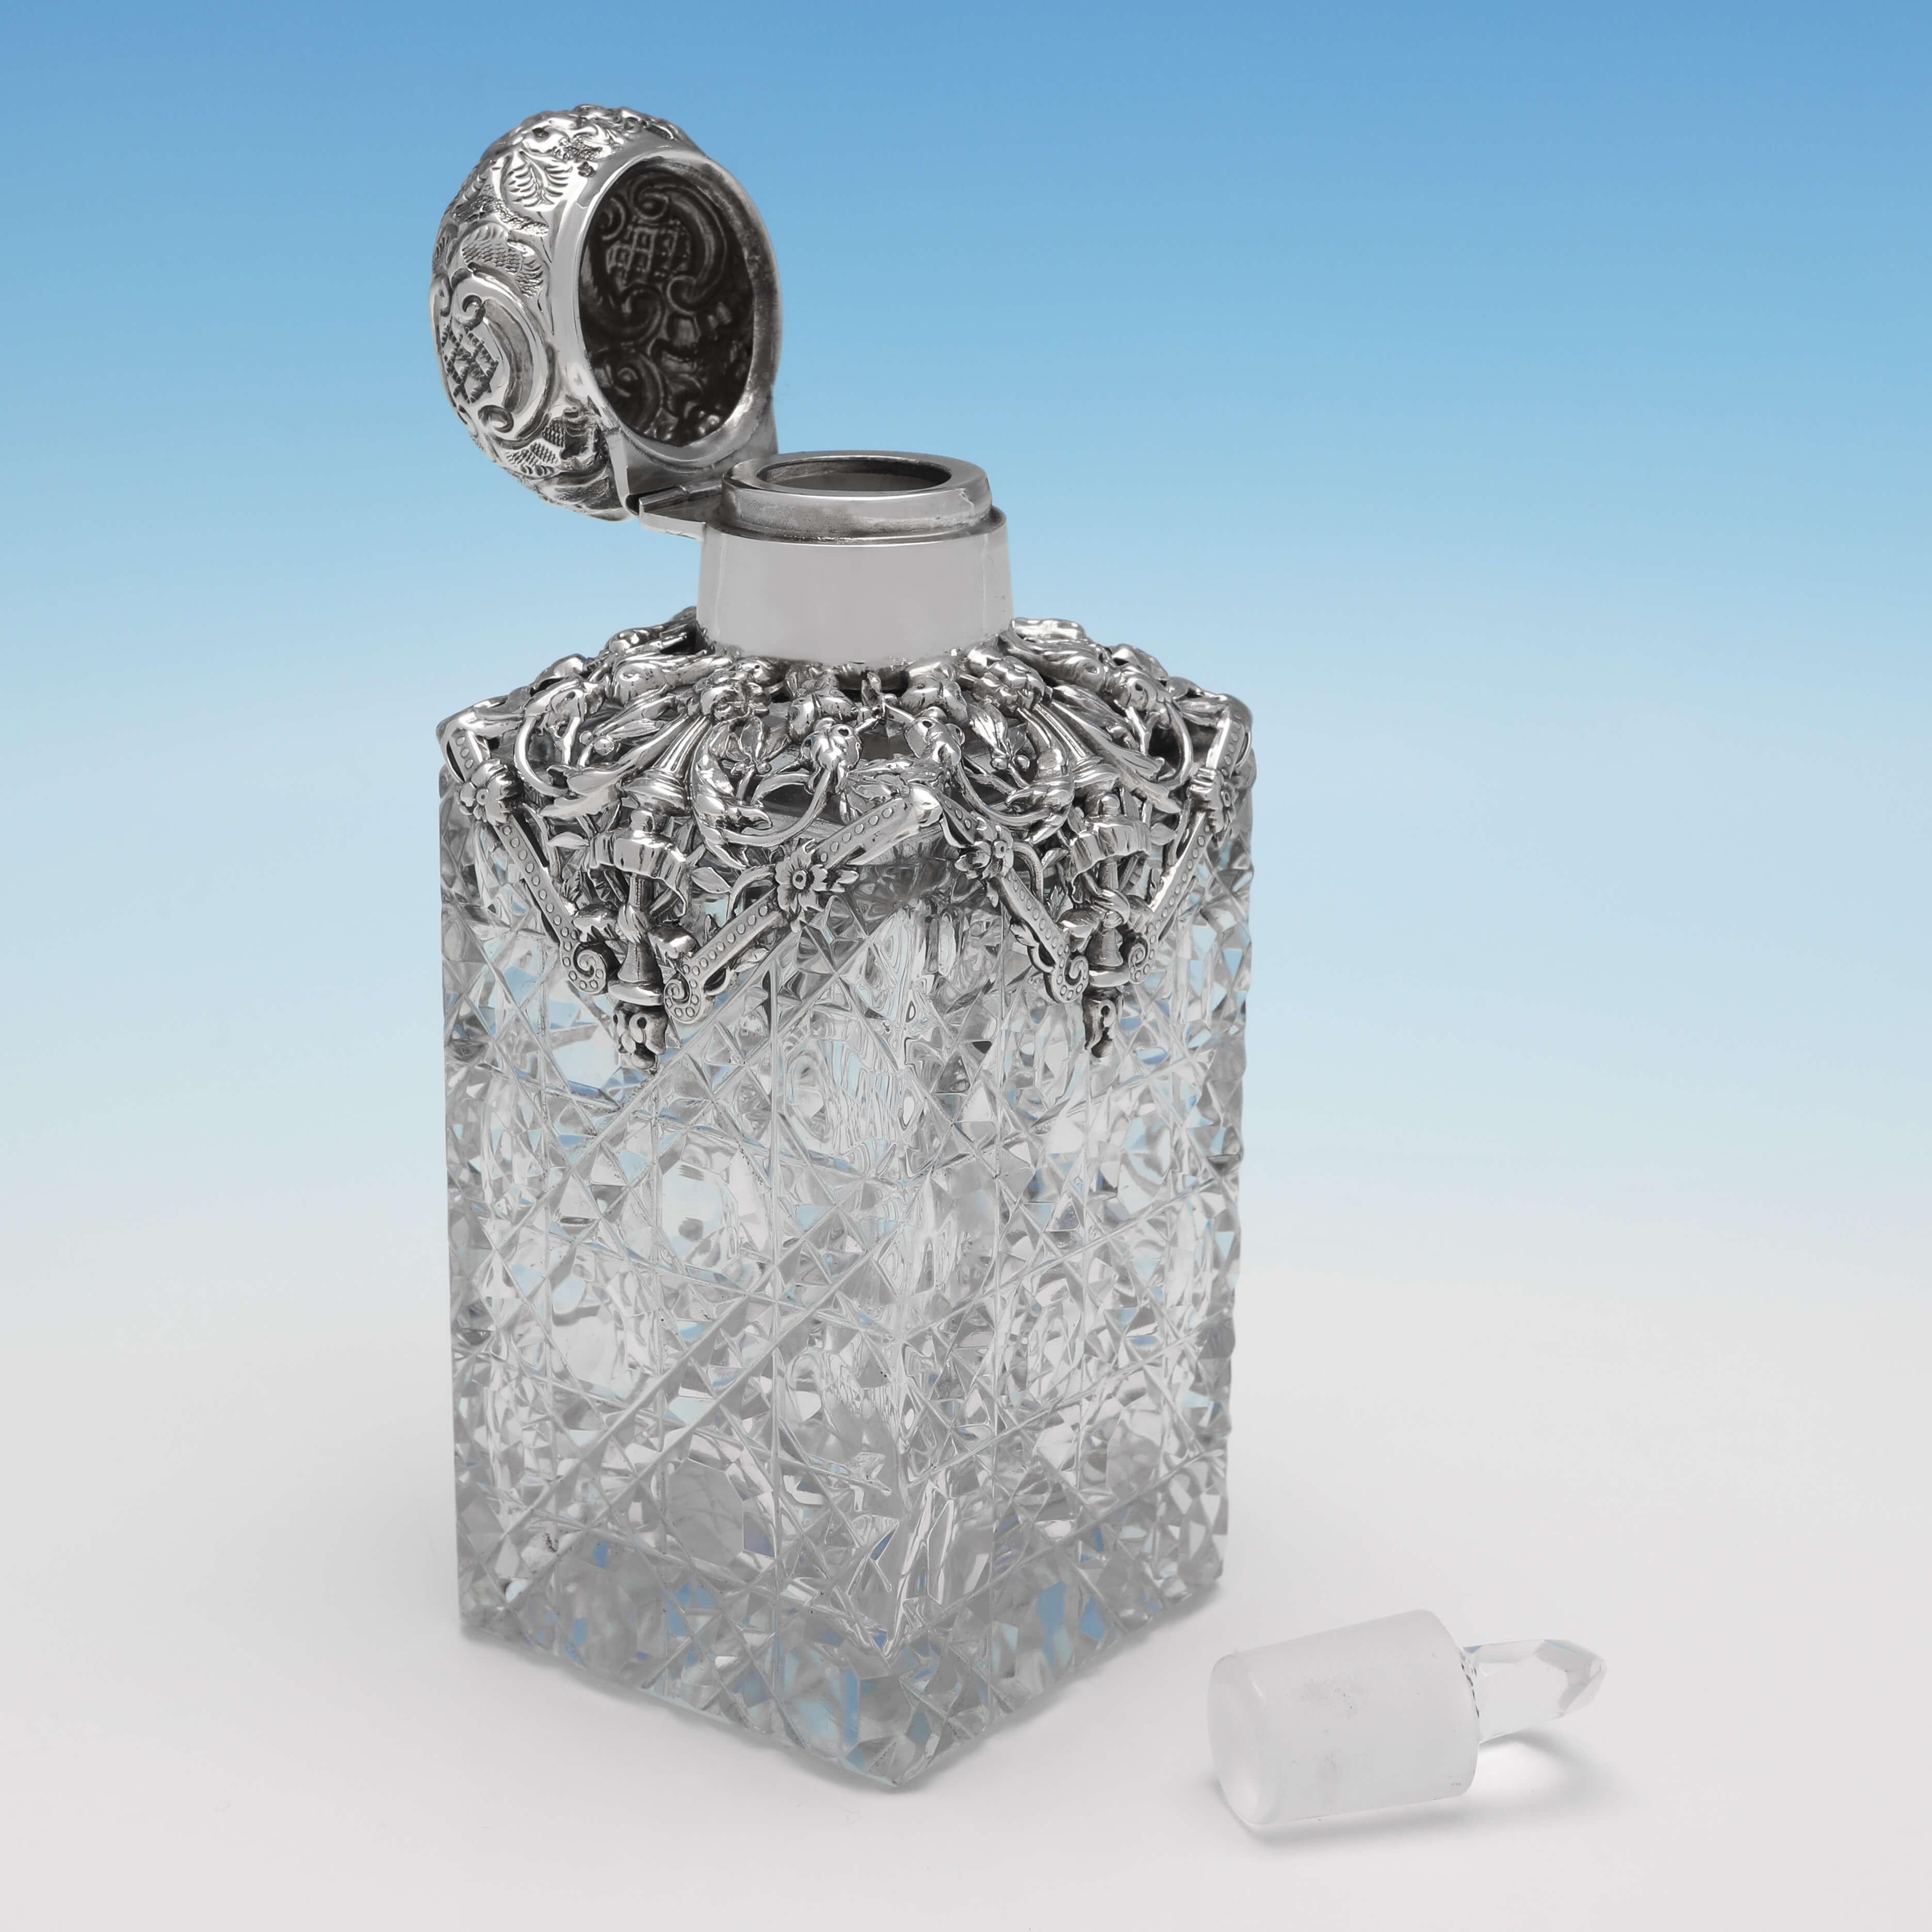 Hallmarked in London in 1896 by R. Halford & Sons, this very attractive, Victorian, Antique Glass & Sterling Silver Scent Bottle, feature a hobnail cut glass body, and an ornate silver mount. The scent bottle measures 5.5